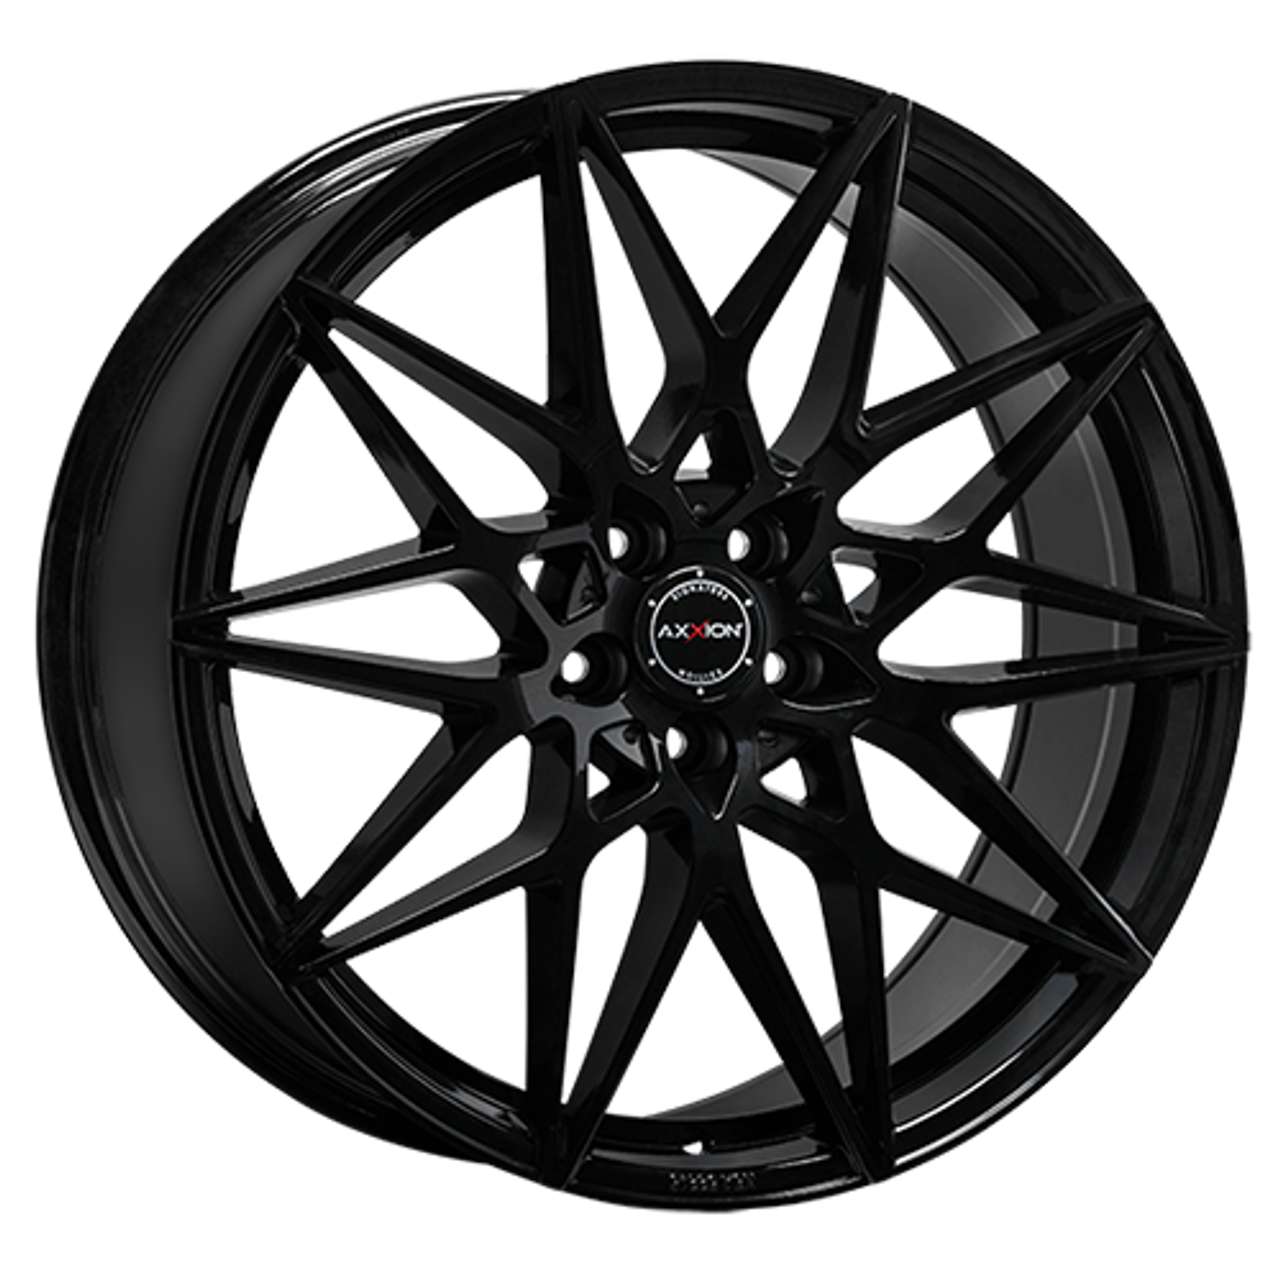 AXXION AX9 black glossy painted 8.5Jx19 5x114 ET40